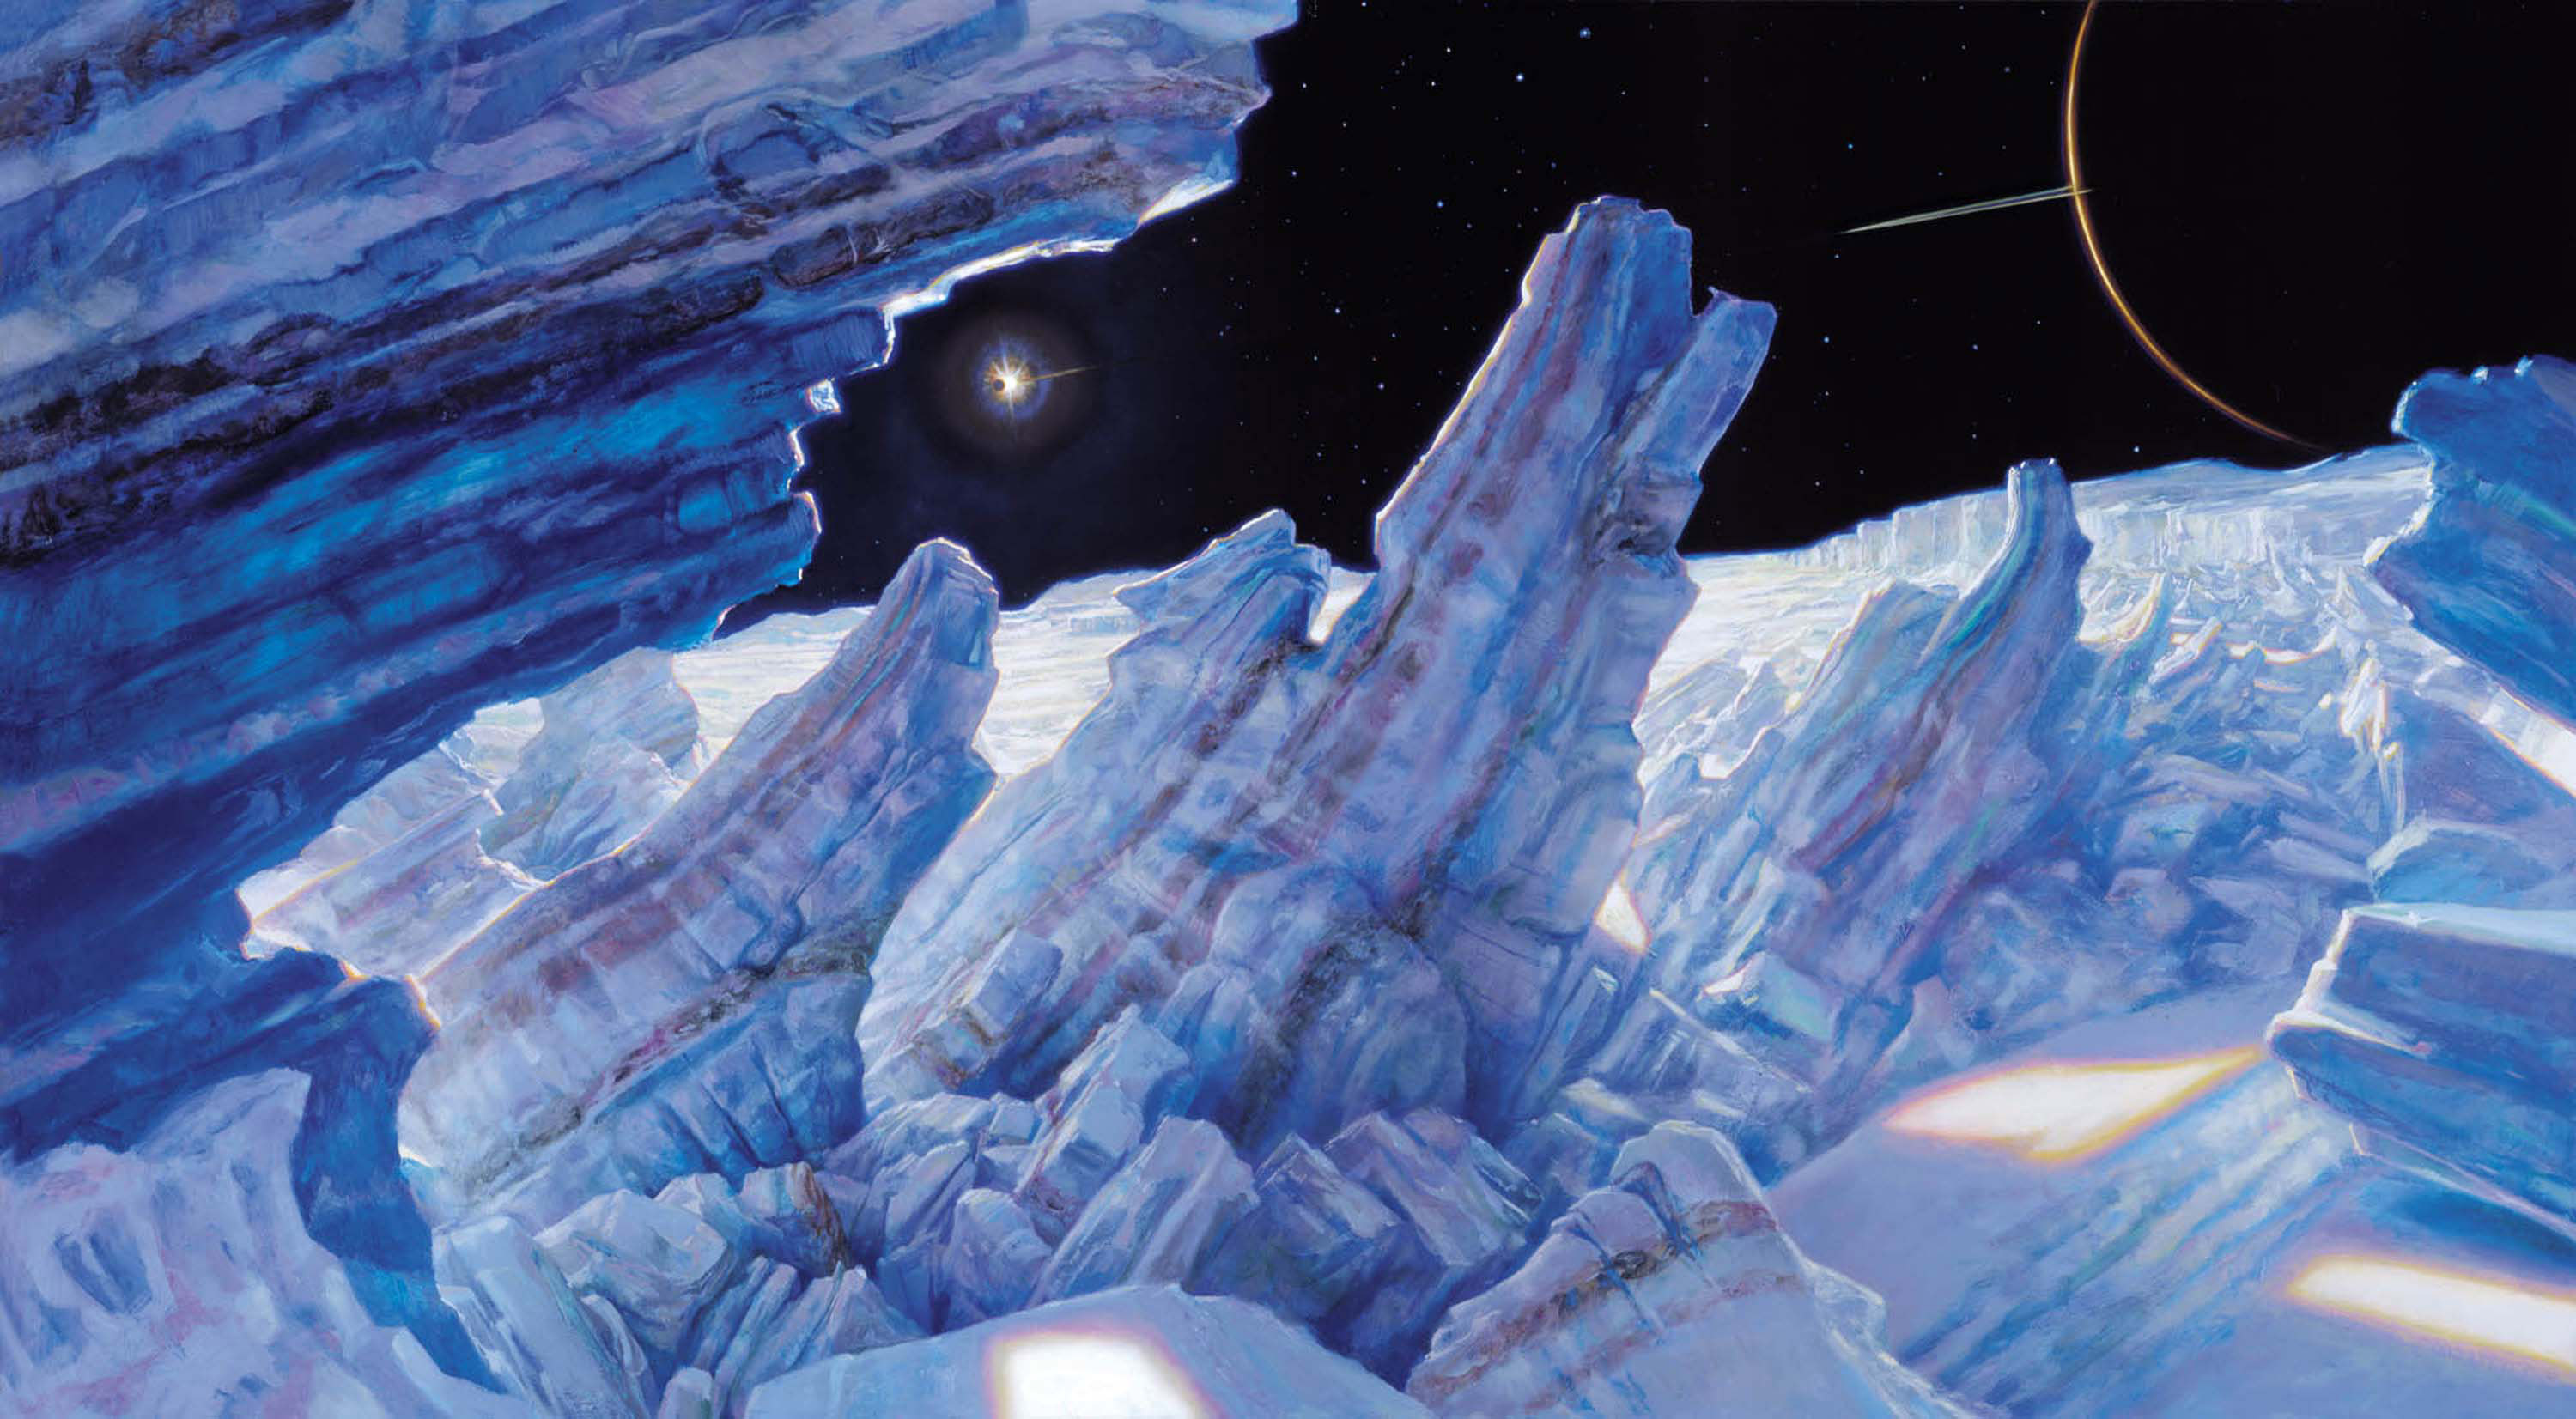 Ice Sheet Fracturing on Europa, Moon of Jupiter
26" x 65"  Oil on Panel  2000
private collection